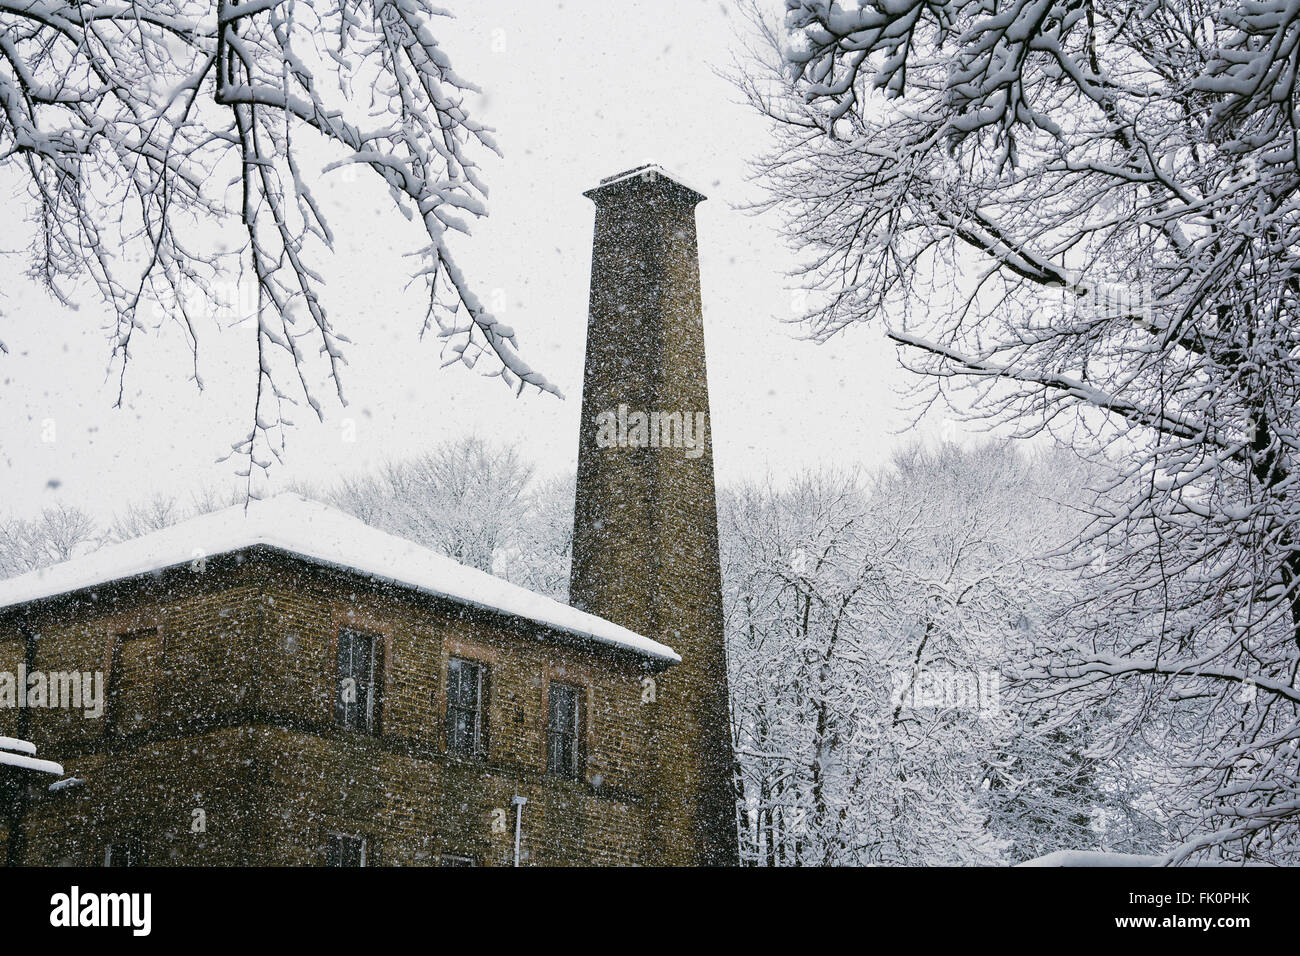 Old industrial building with tower in a snow storm. Buxton, England. Stock Photo